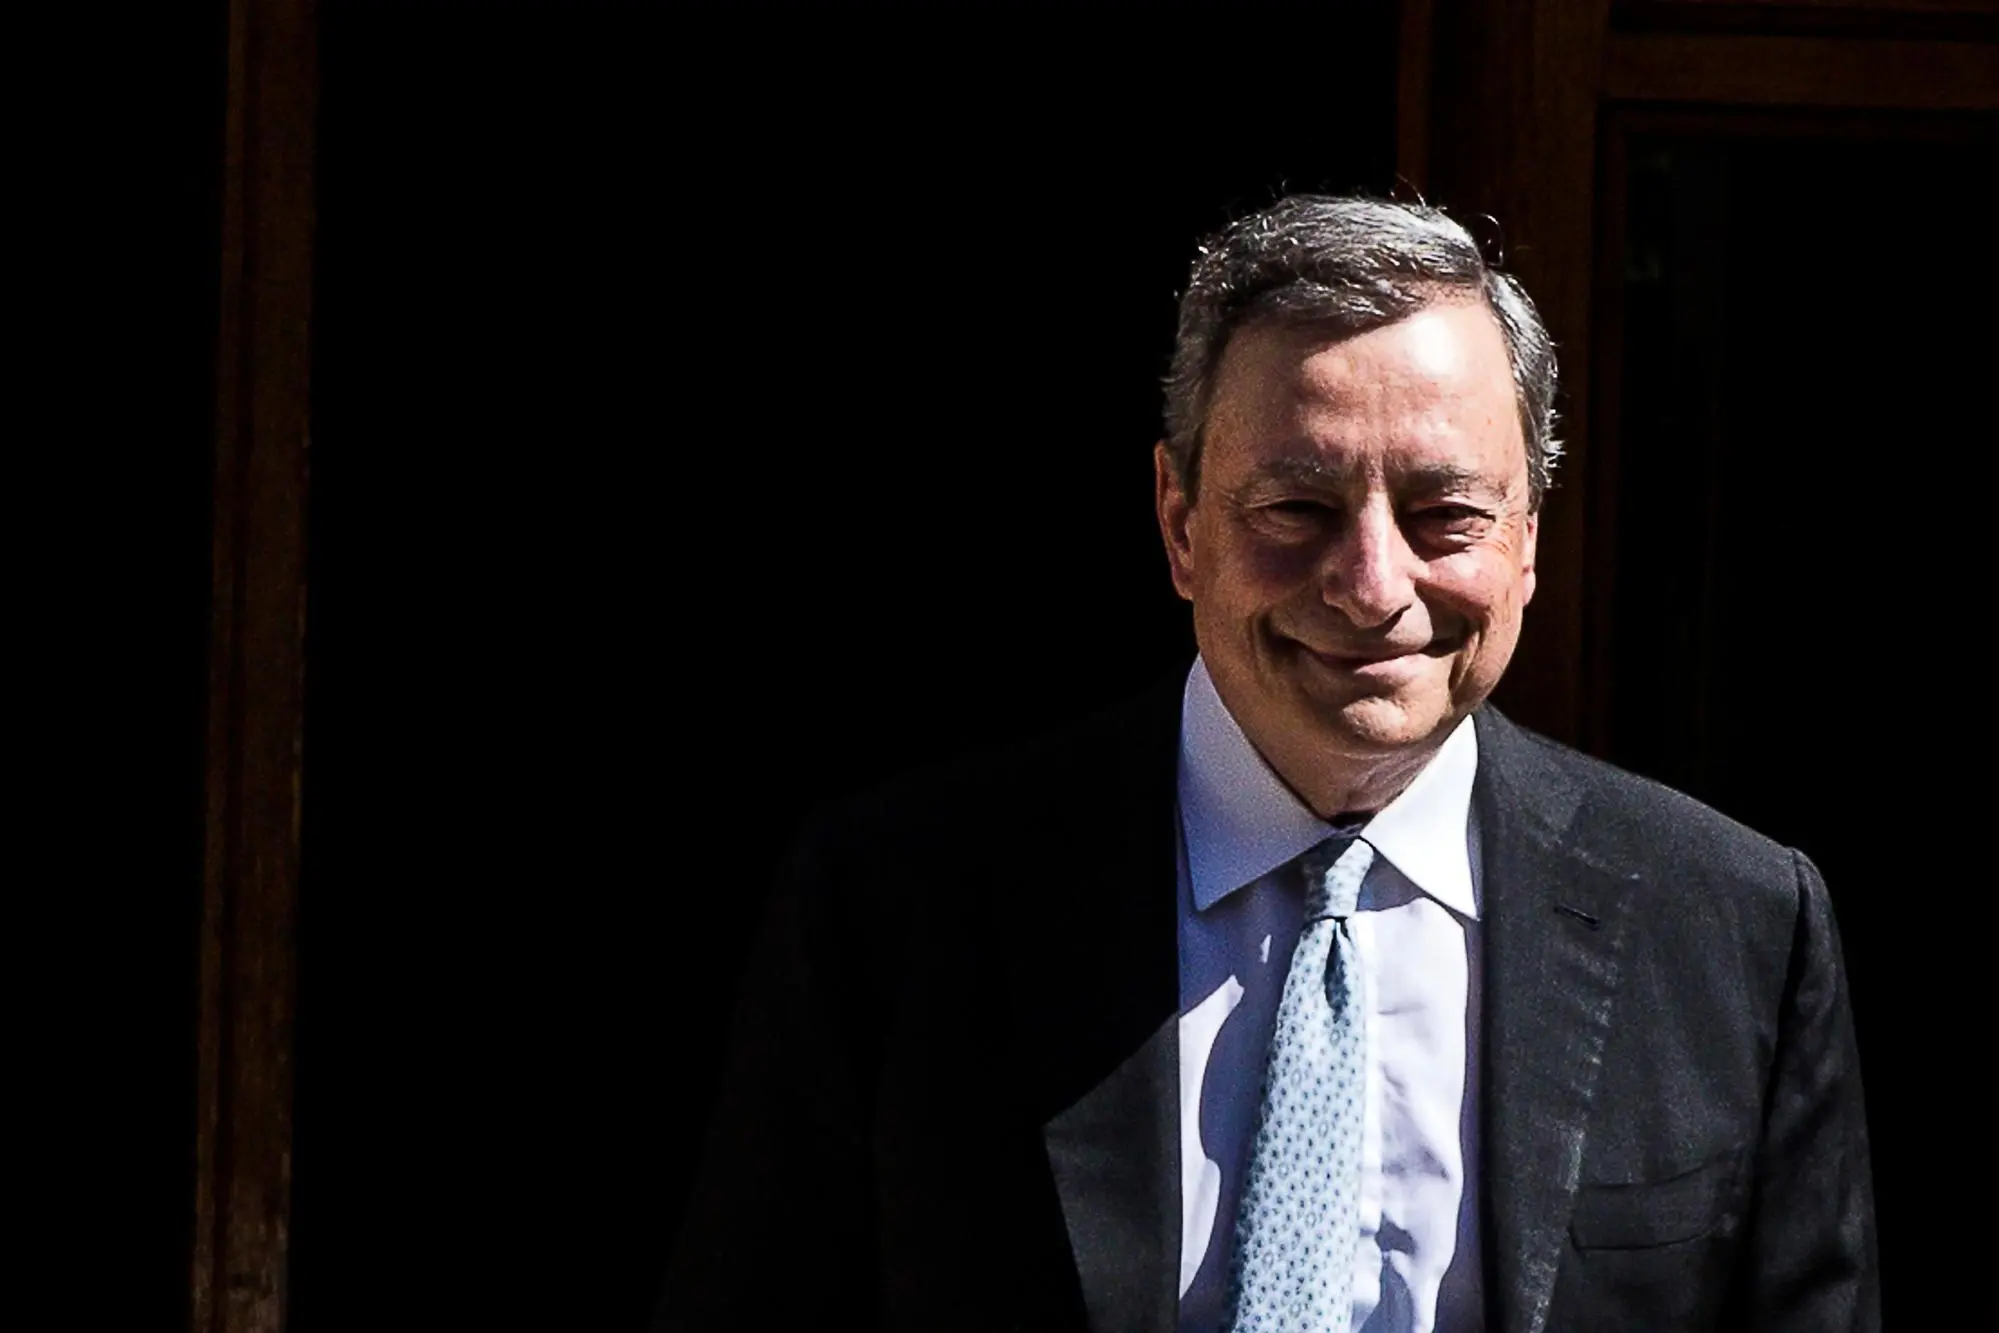 Prime Minister Mario Draghi after leaving the NATO summit in Madrid early, in Rome, Italy, June 30, 2022. Premier Mario Draghi returned to Rome from the NATO summit in Madrid early on Wednesday amid soaring tension with his predecessor Giuseppe Conte, the leader of the 5-Star Movement (M5S), a key part of the ruling coalition.ANSA/ANGELO CARCONI